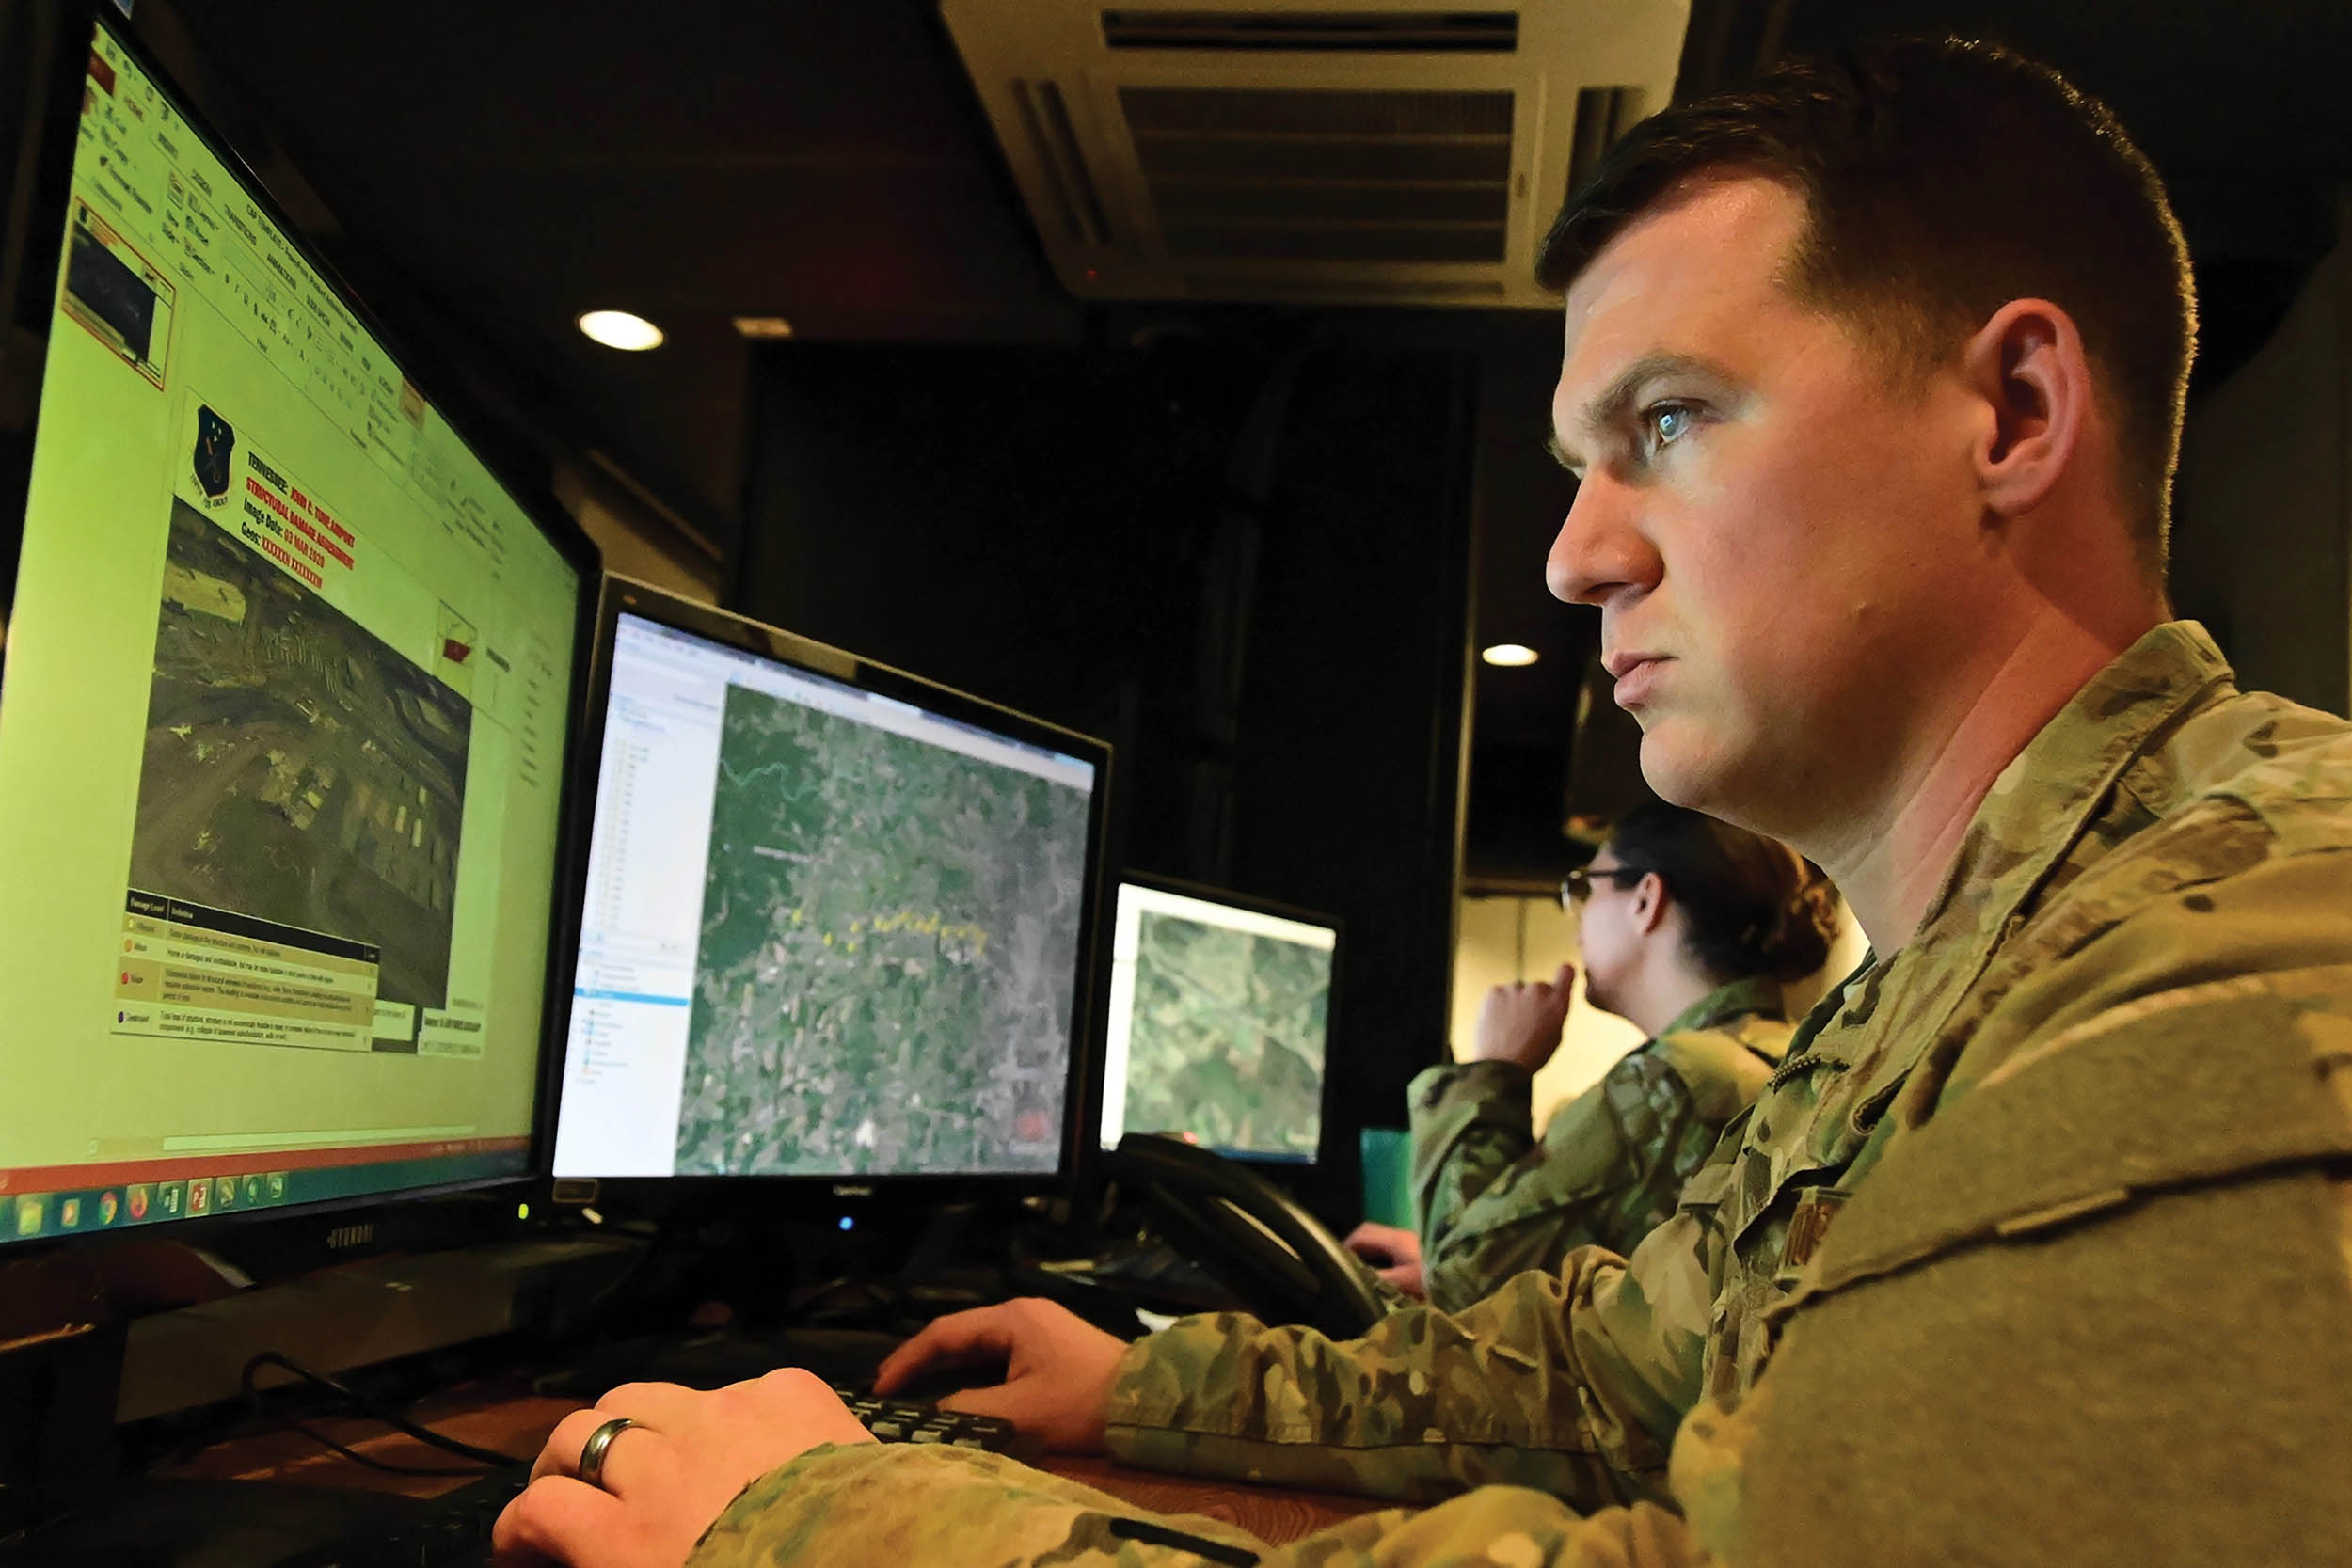 Airman from 118th Intelligence, Surveillance, and Reconnaissance Group, Tennessee Air National Guard, examines images of tornado damage across Tennessee, March 4, 2020, at Berry Field Air National Guard Base, Nashville, Tennessee (U.S. Air National Guard/Anthony Agosti)